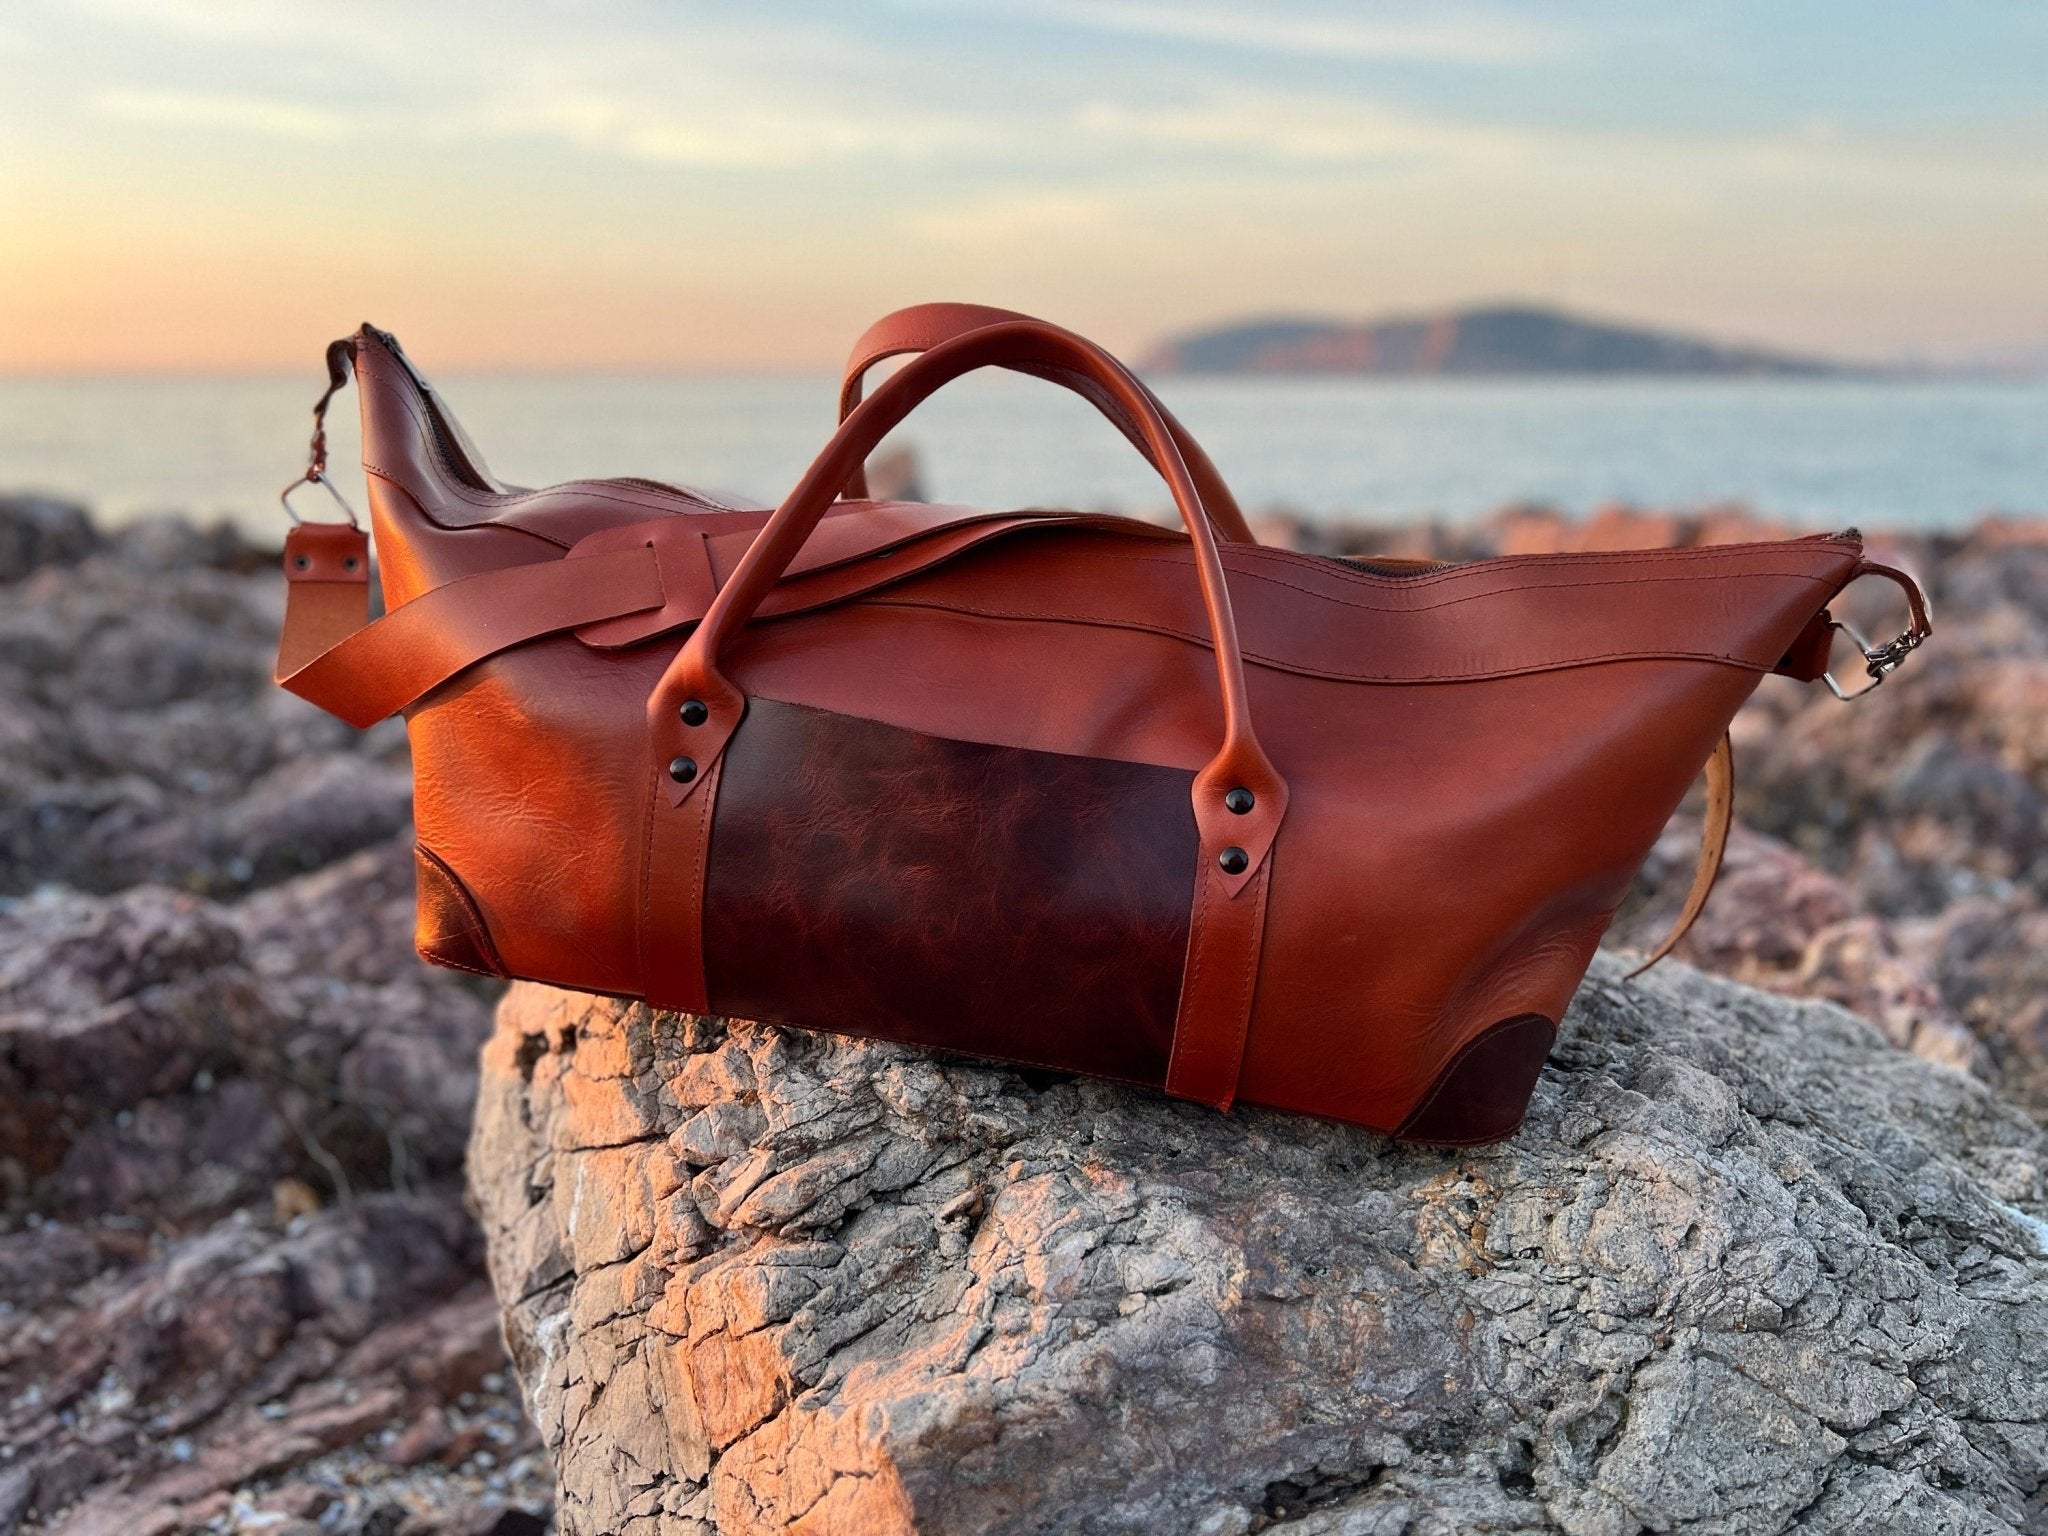 Large Range of Leather Duffel and Travel Bags - Handmade Vintage Style –  Vida Vida Leather Bags & Accessories